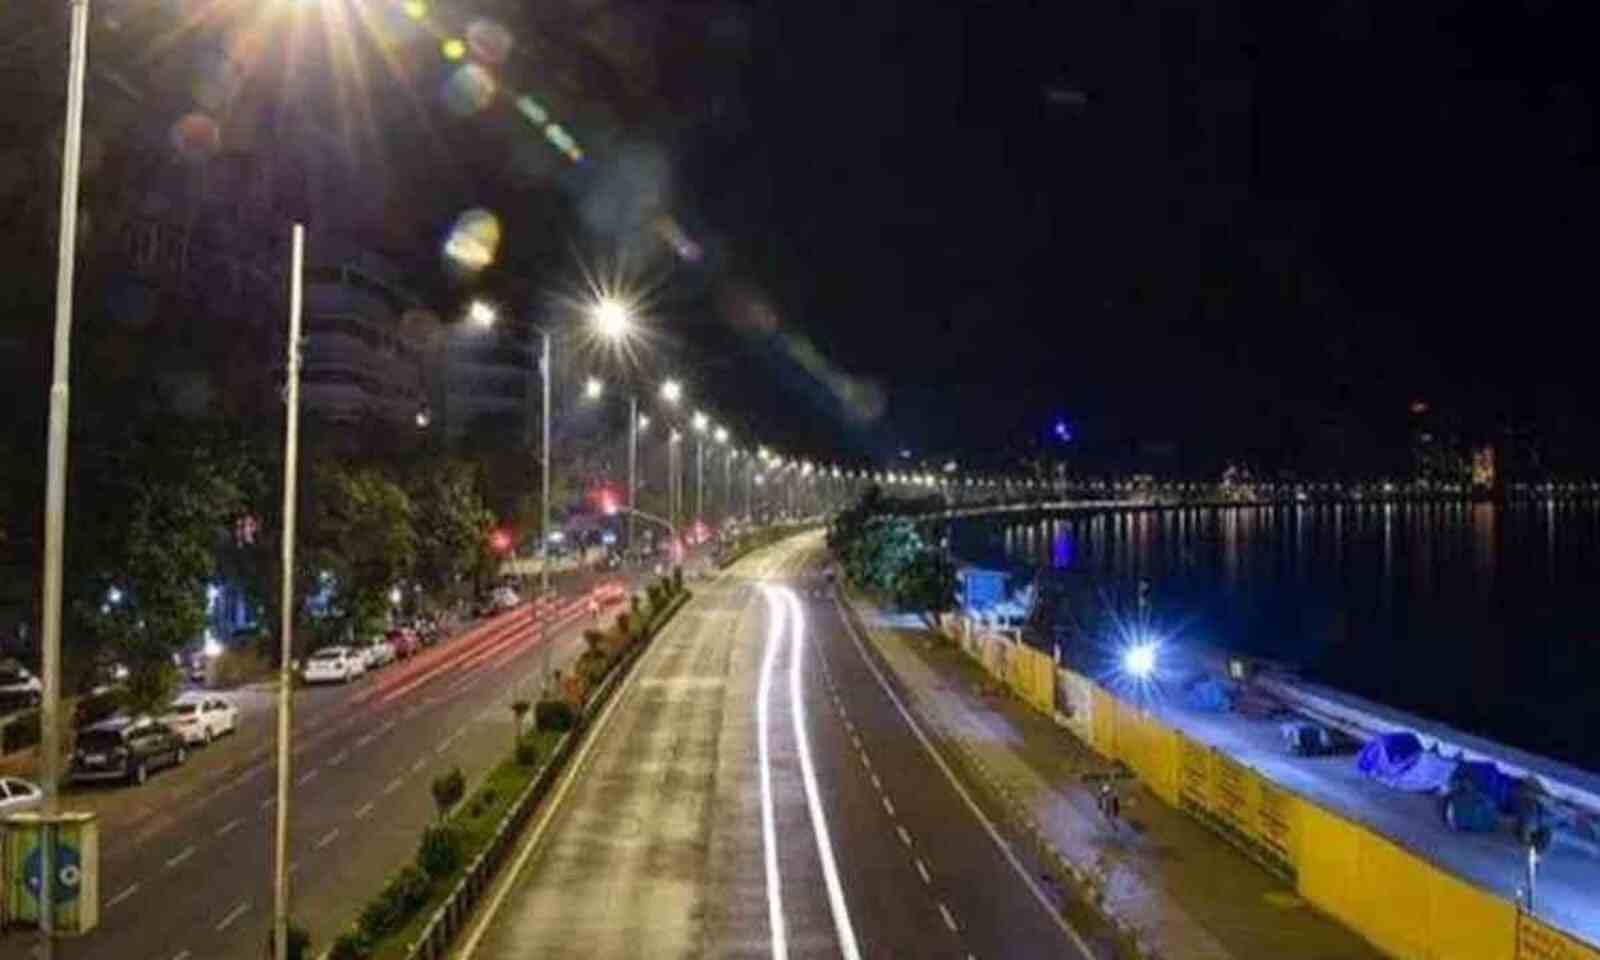 Wandering on the streets of Mumbai at 1.30 am not an offence: Court